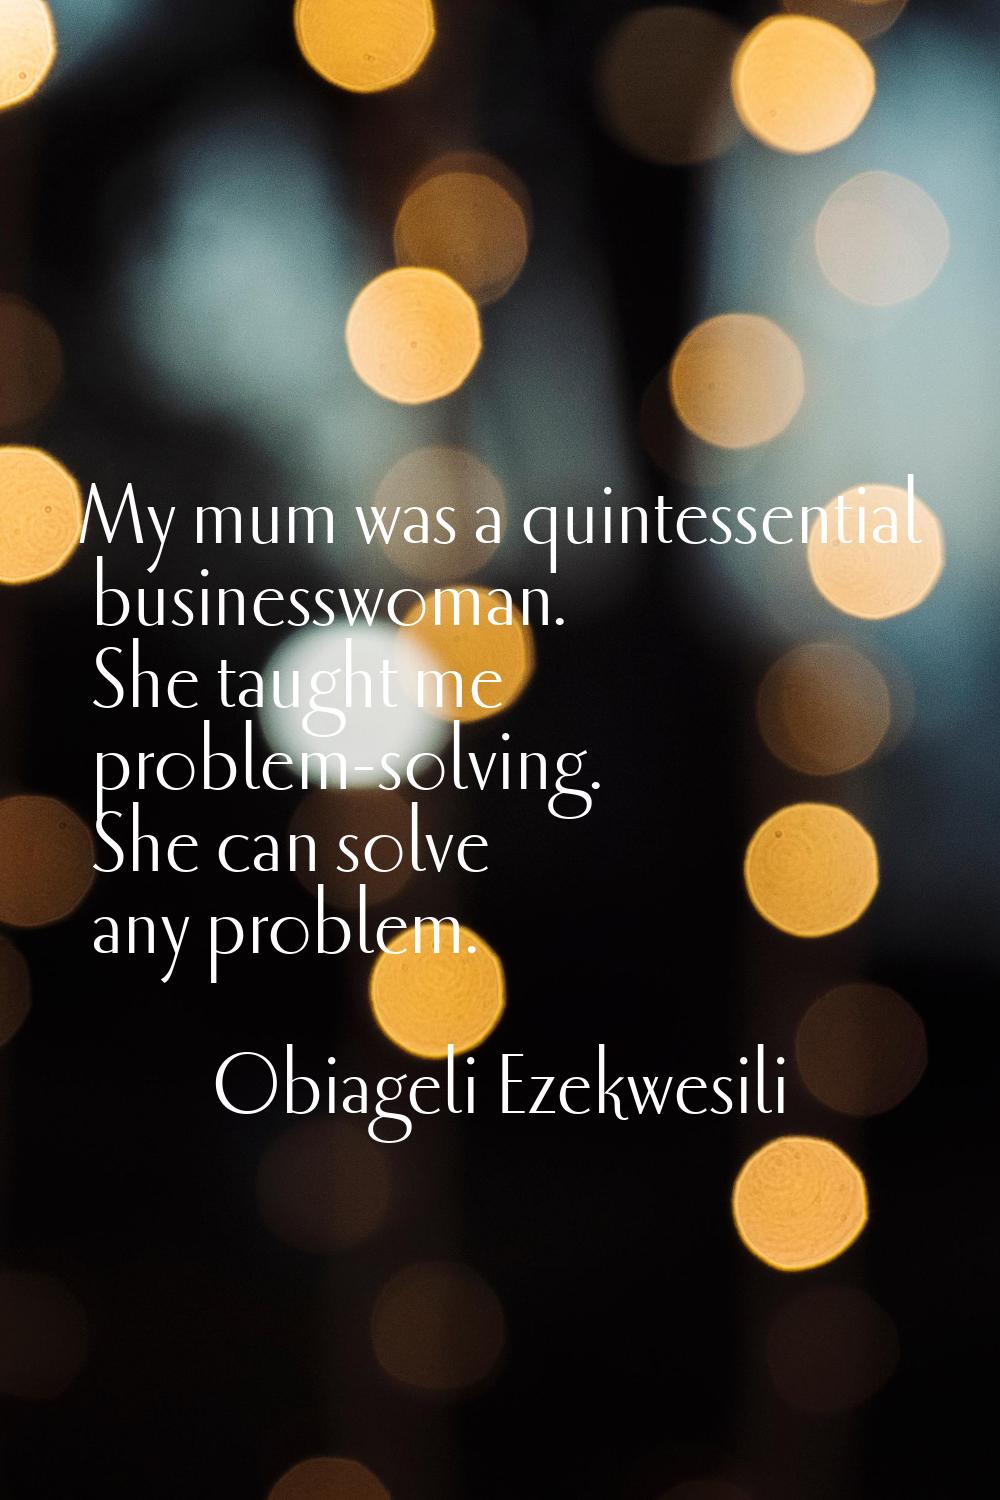 My mum was a quintessential businesswoman. She taught me problem-solving. She can solve any problem